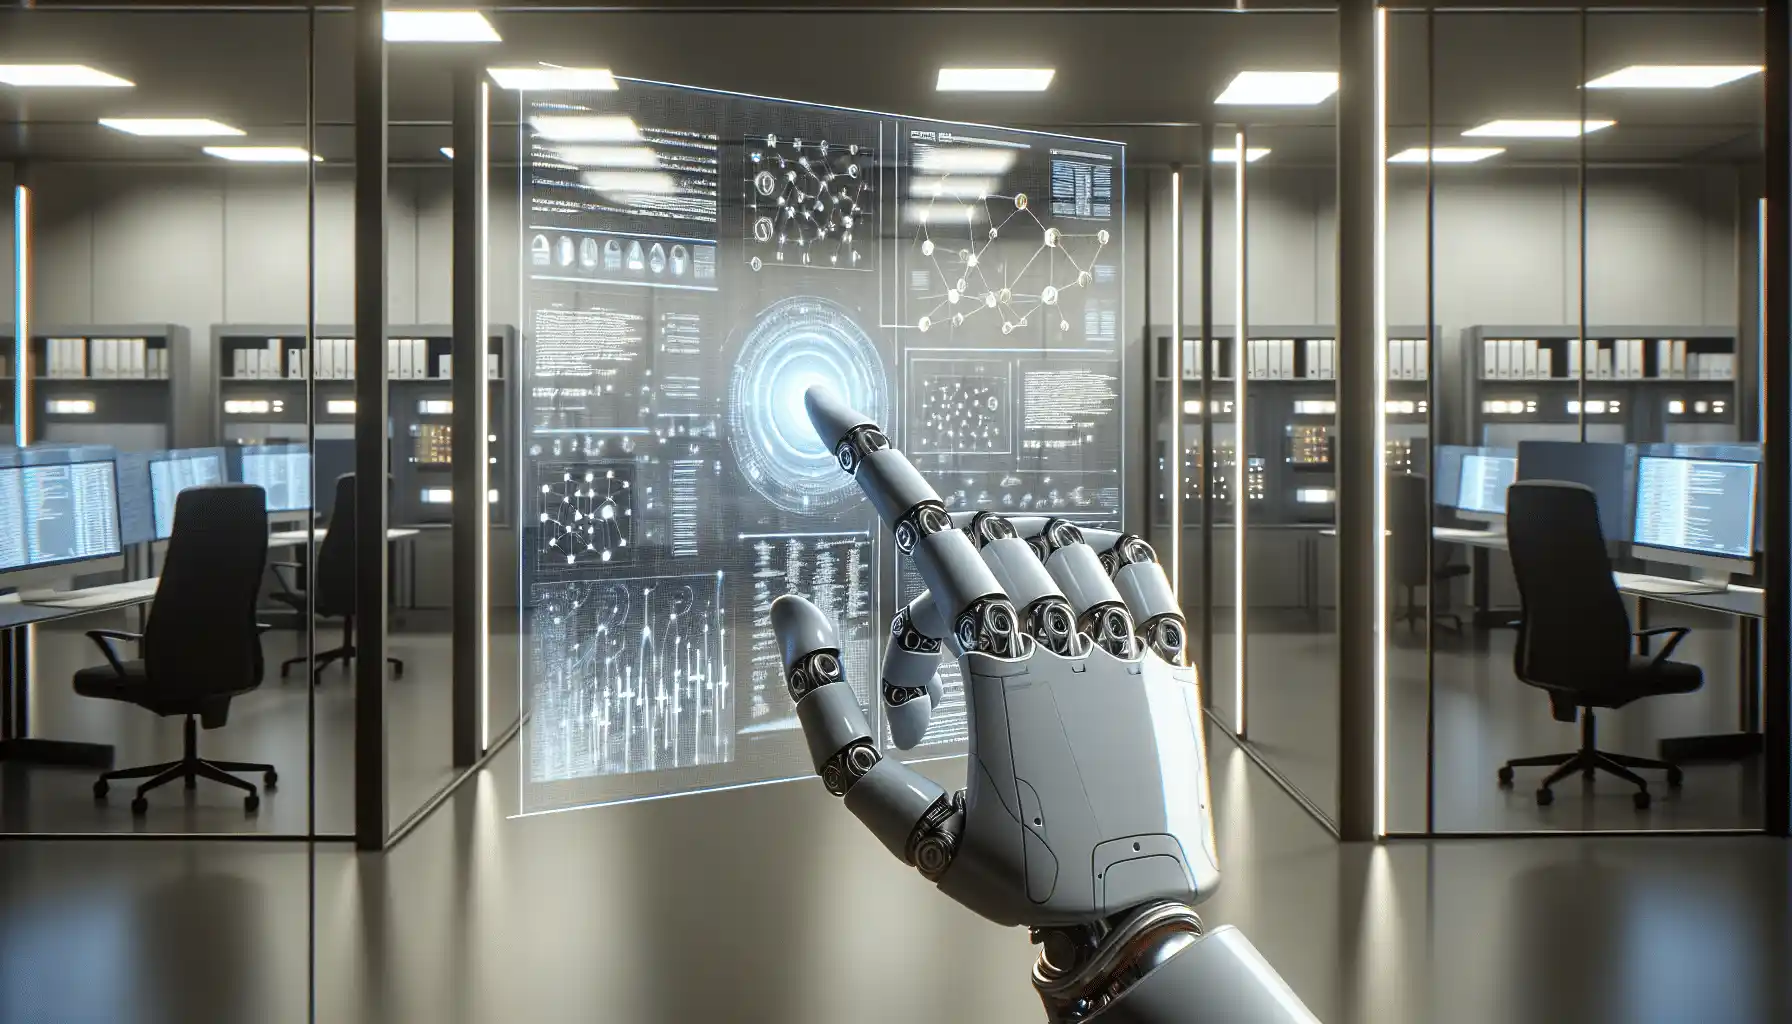 Futuristic depiction of AI and automation in a high-tech control room.